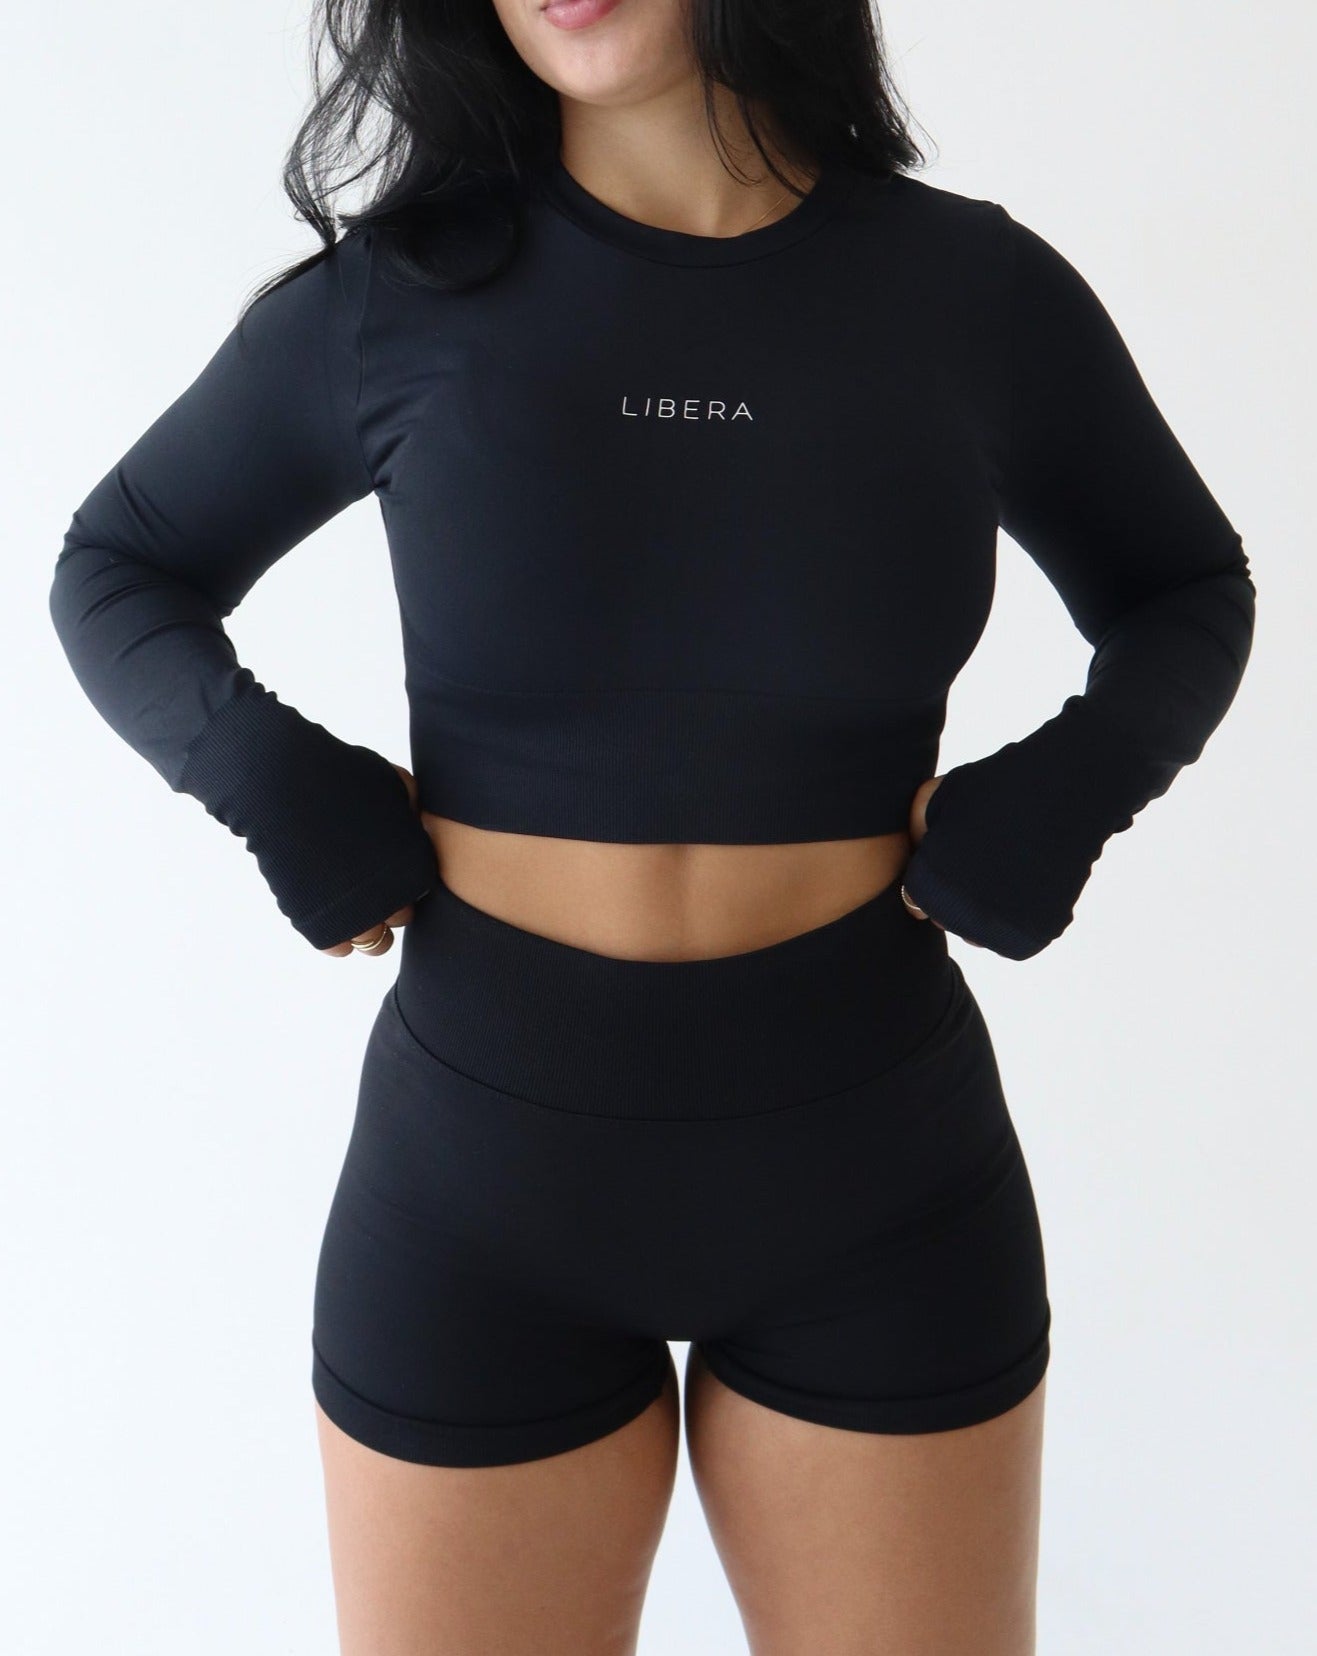 Magnify Long Sleeve Crop - BLACK - LIBERA Fitness Apparel. Stay cool and stylish during workouts with our MAGNIFY Long Sleeve Crop Top. Featuring a crew neckline and thumbholes, it offers a secure fit. Perfect for low-impact activities. Pair with our MAGNIFY seamless bottoms.